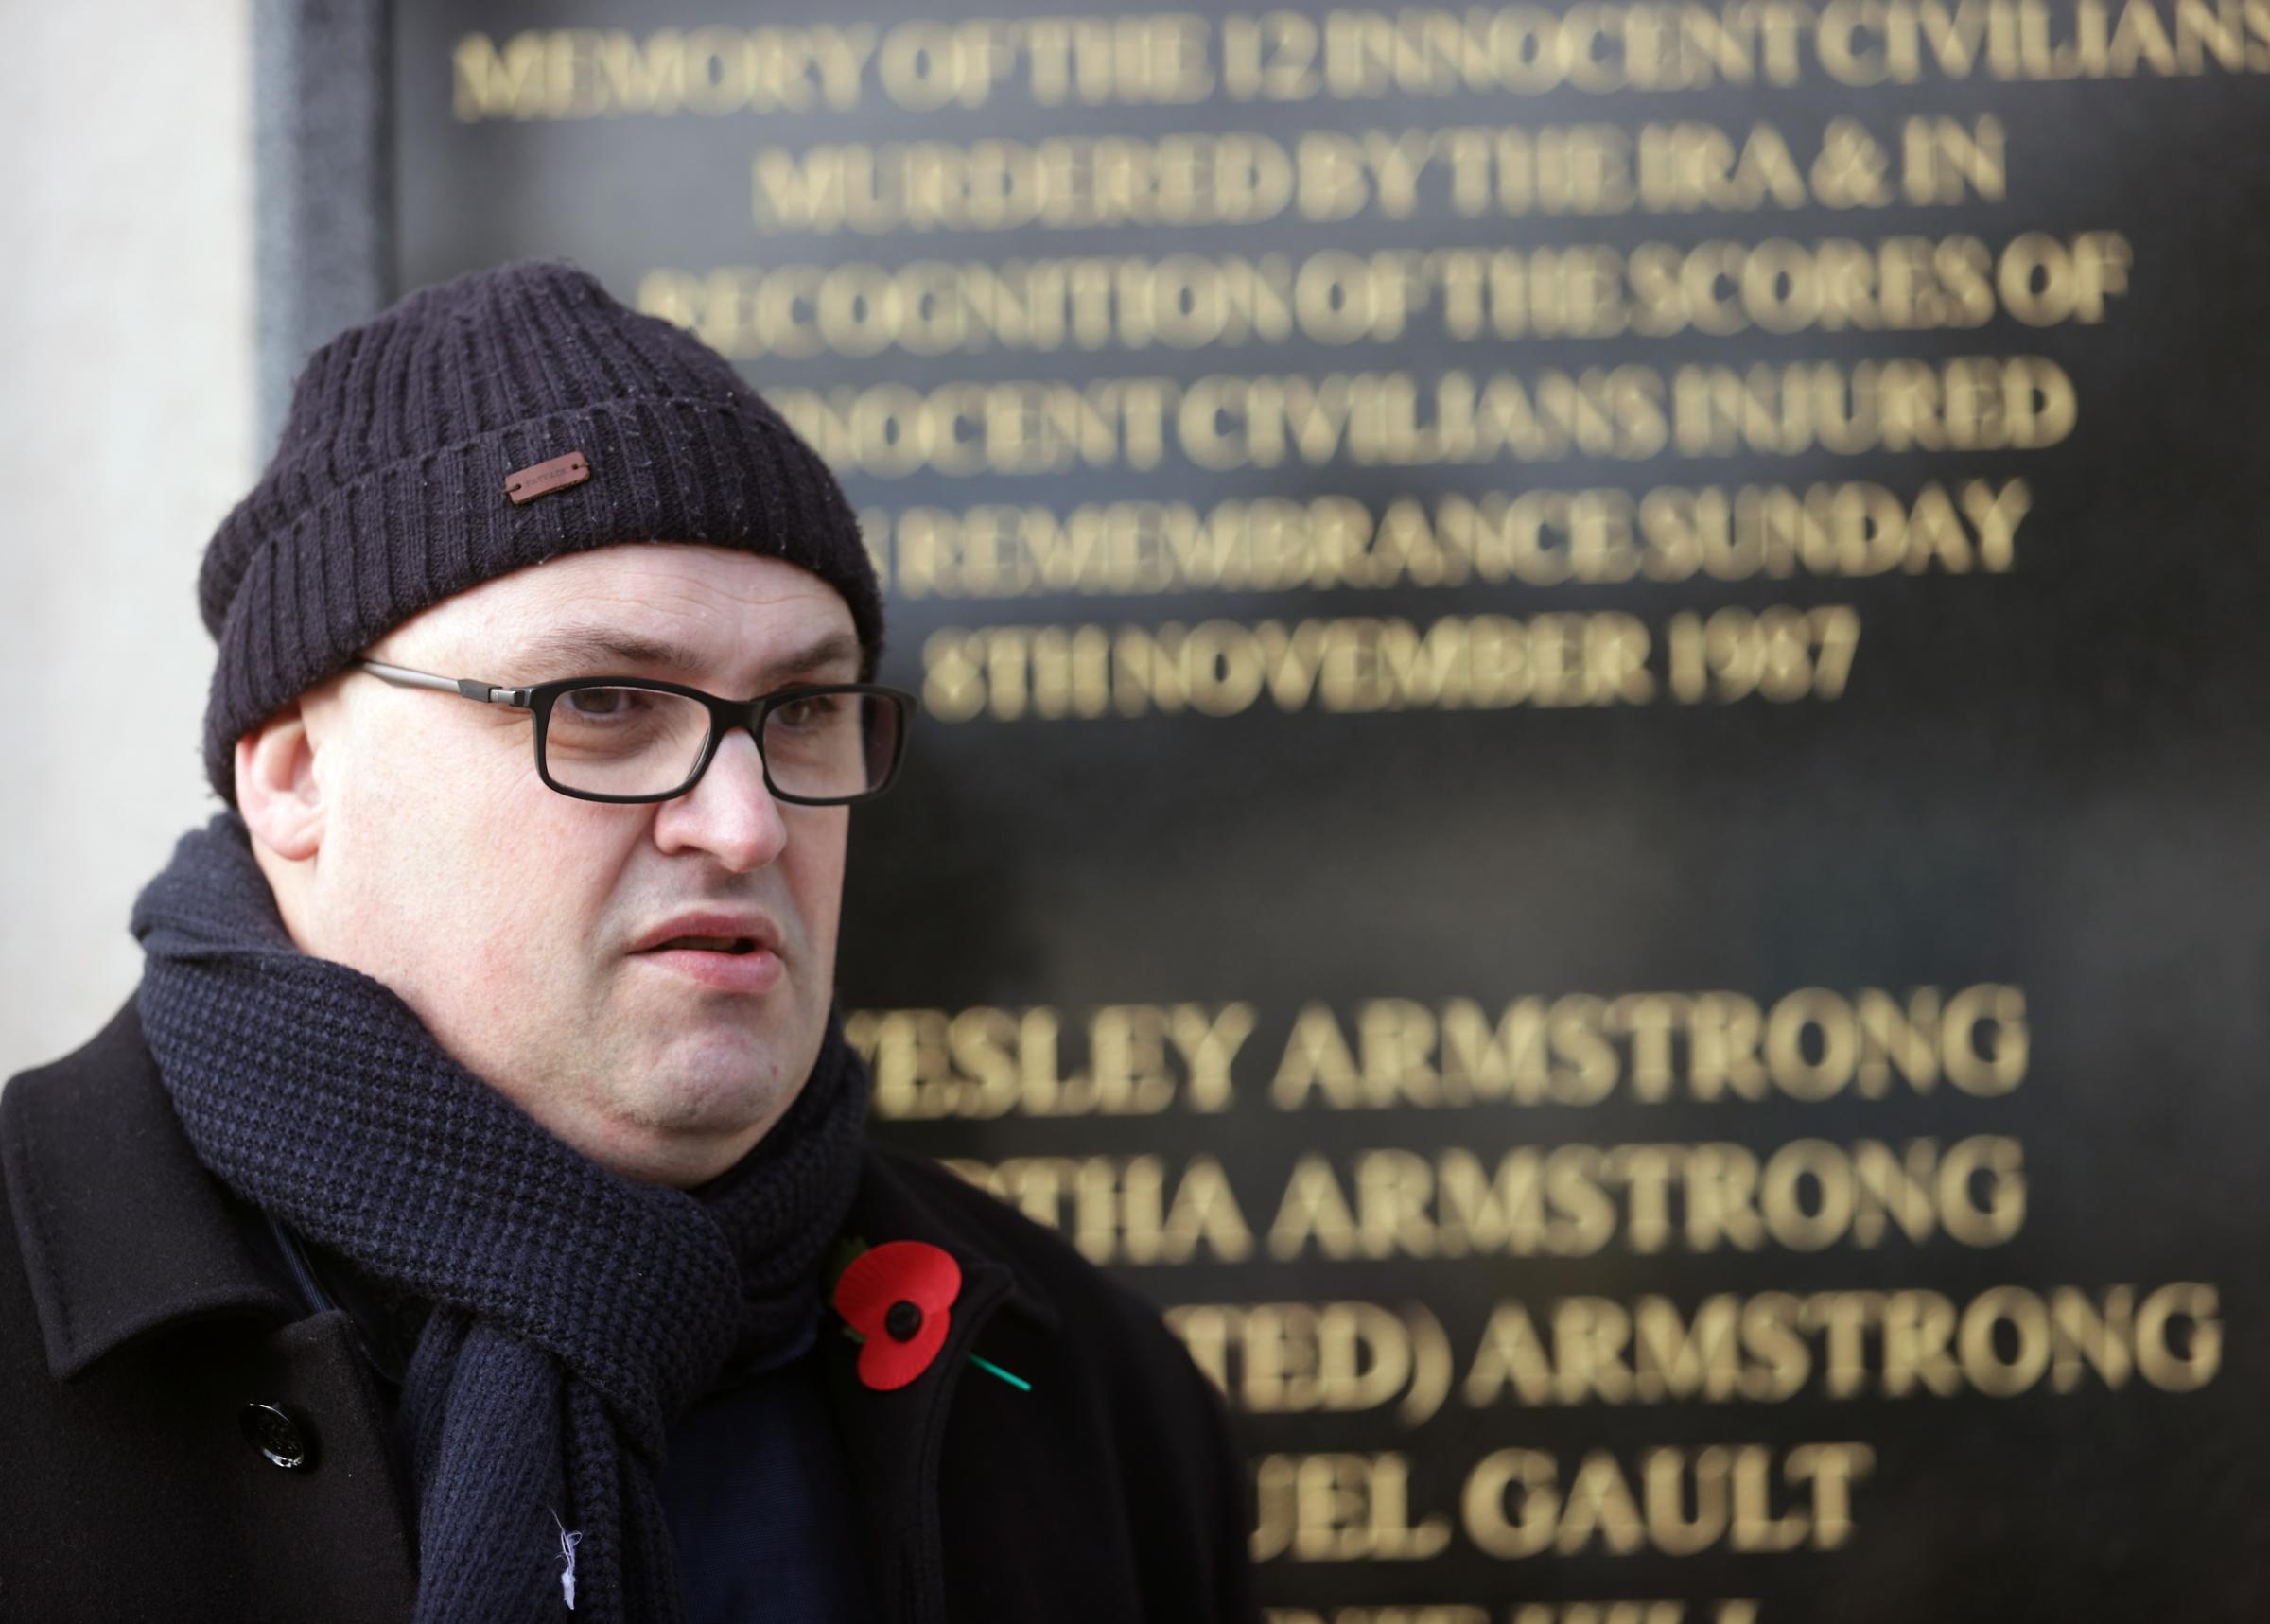 Julian Armstrong, (son of Wesley and Bertha Armstrong), killed in Enniskillen Bomb.